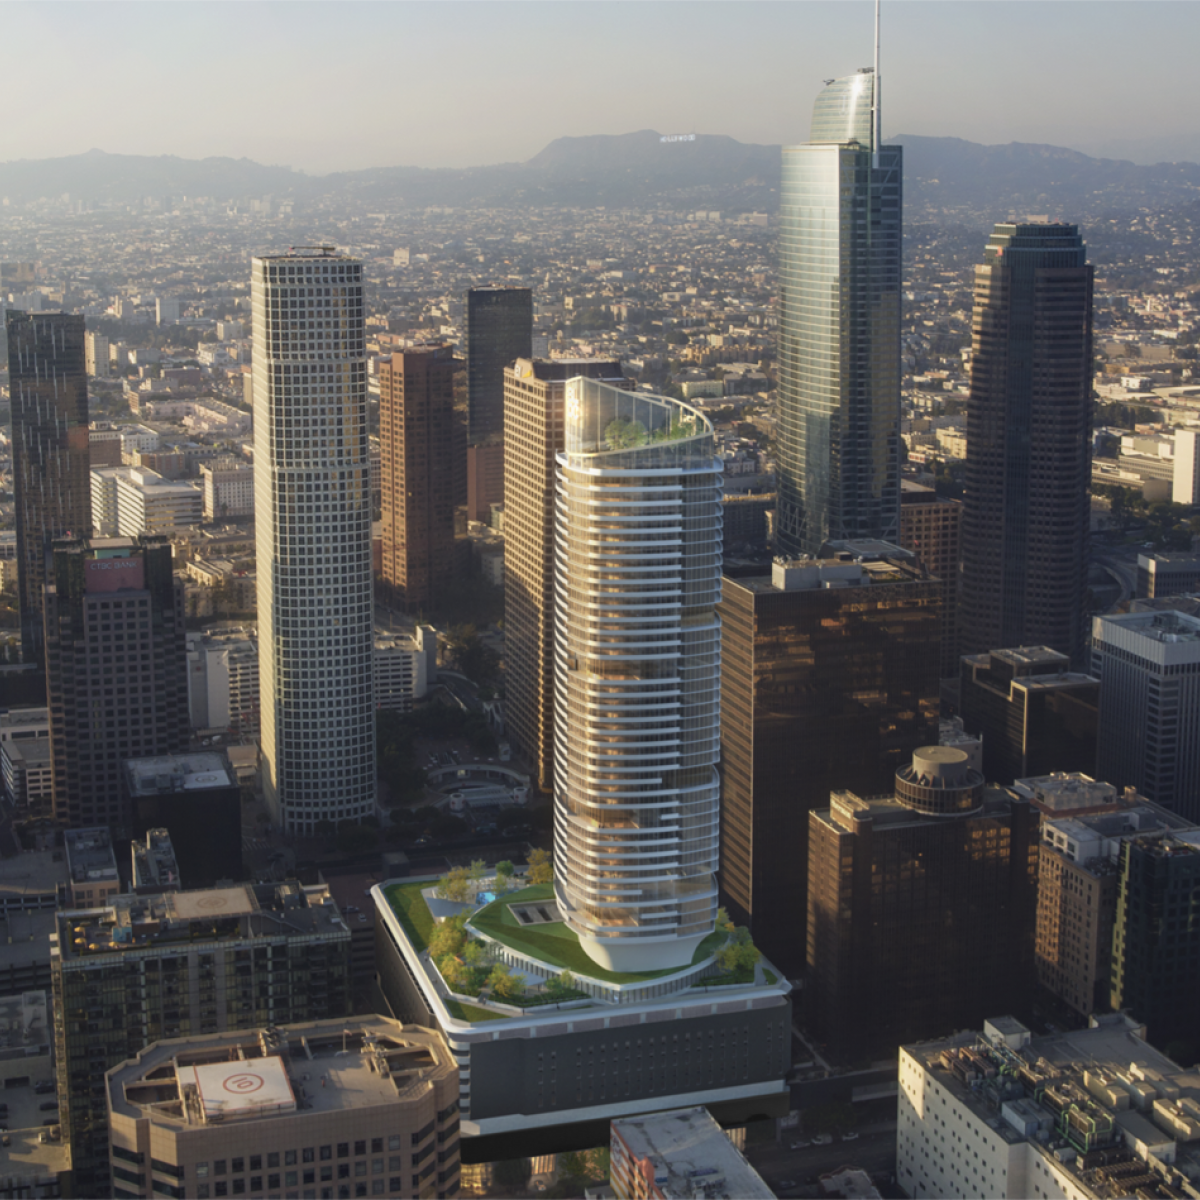 New angles of the 53-story apartment tower planned at The BLOC